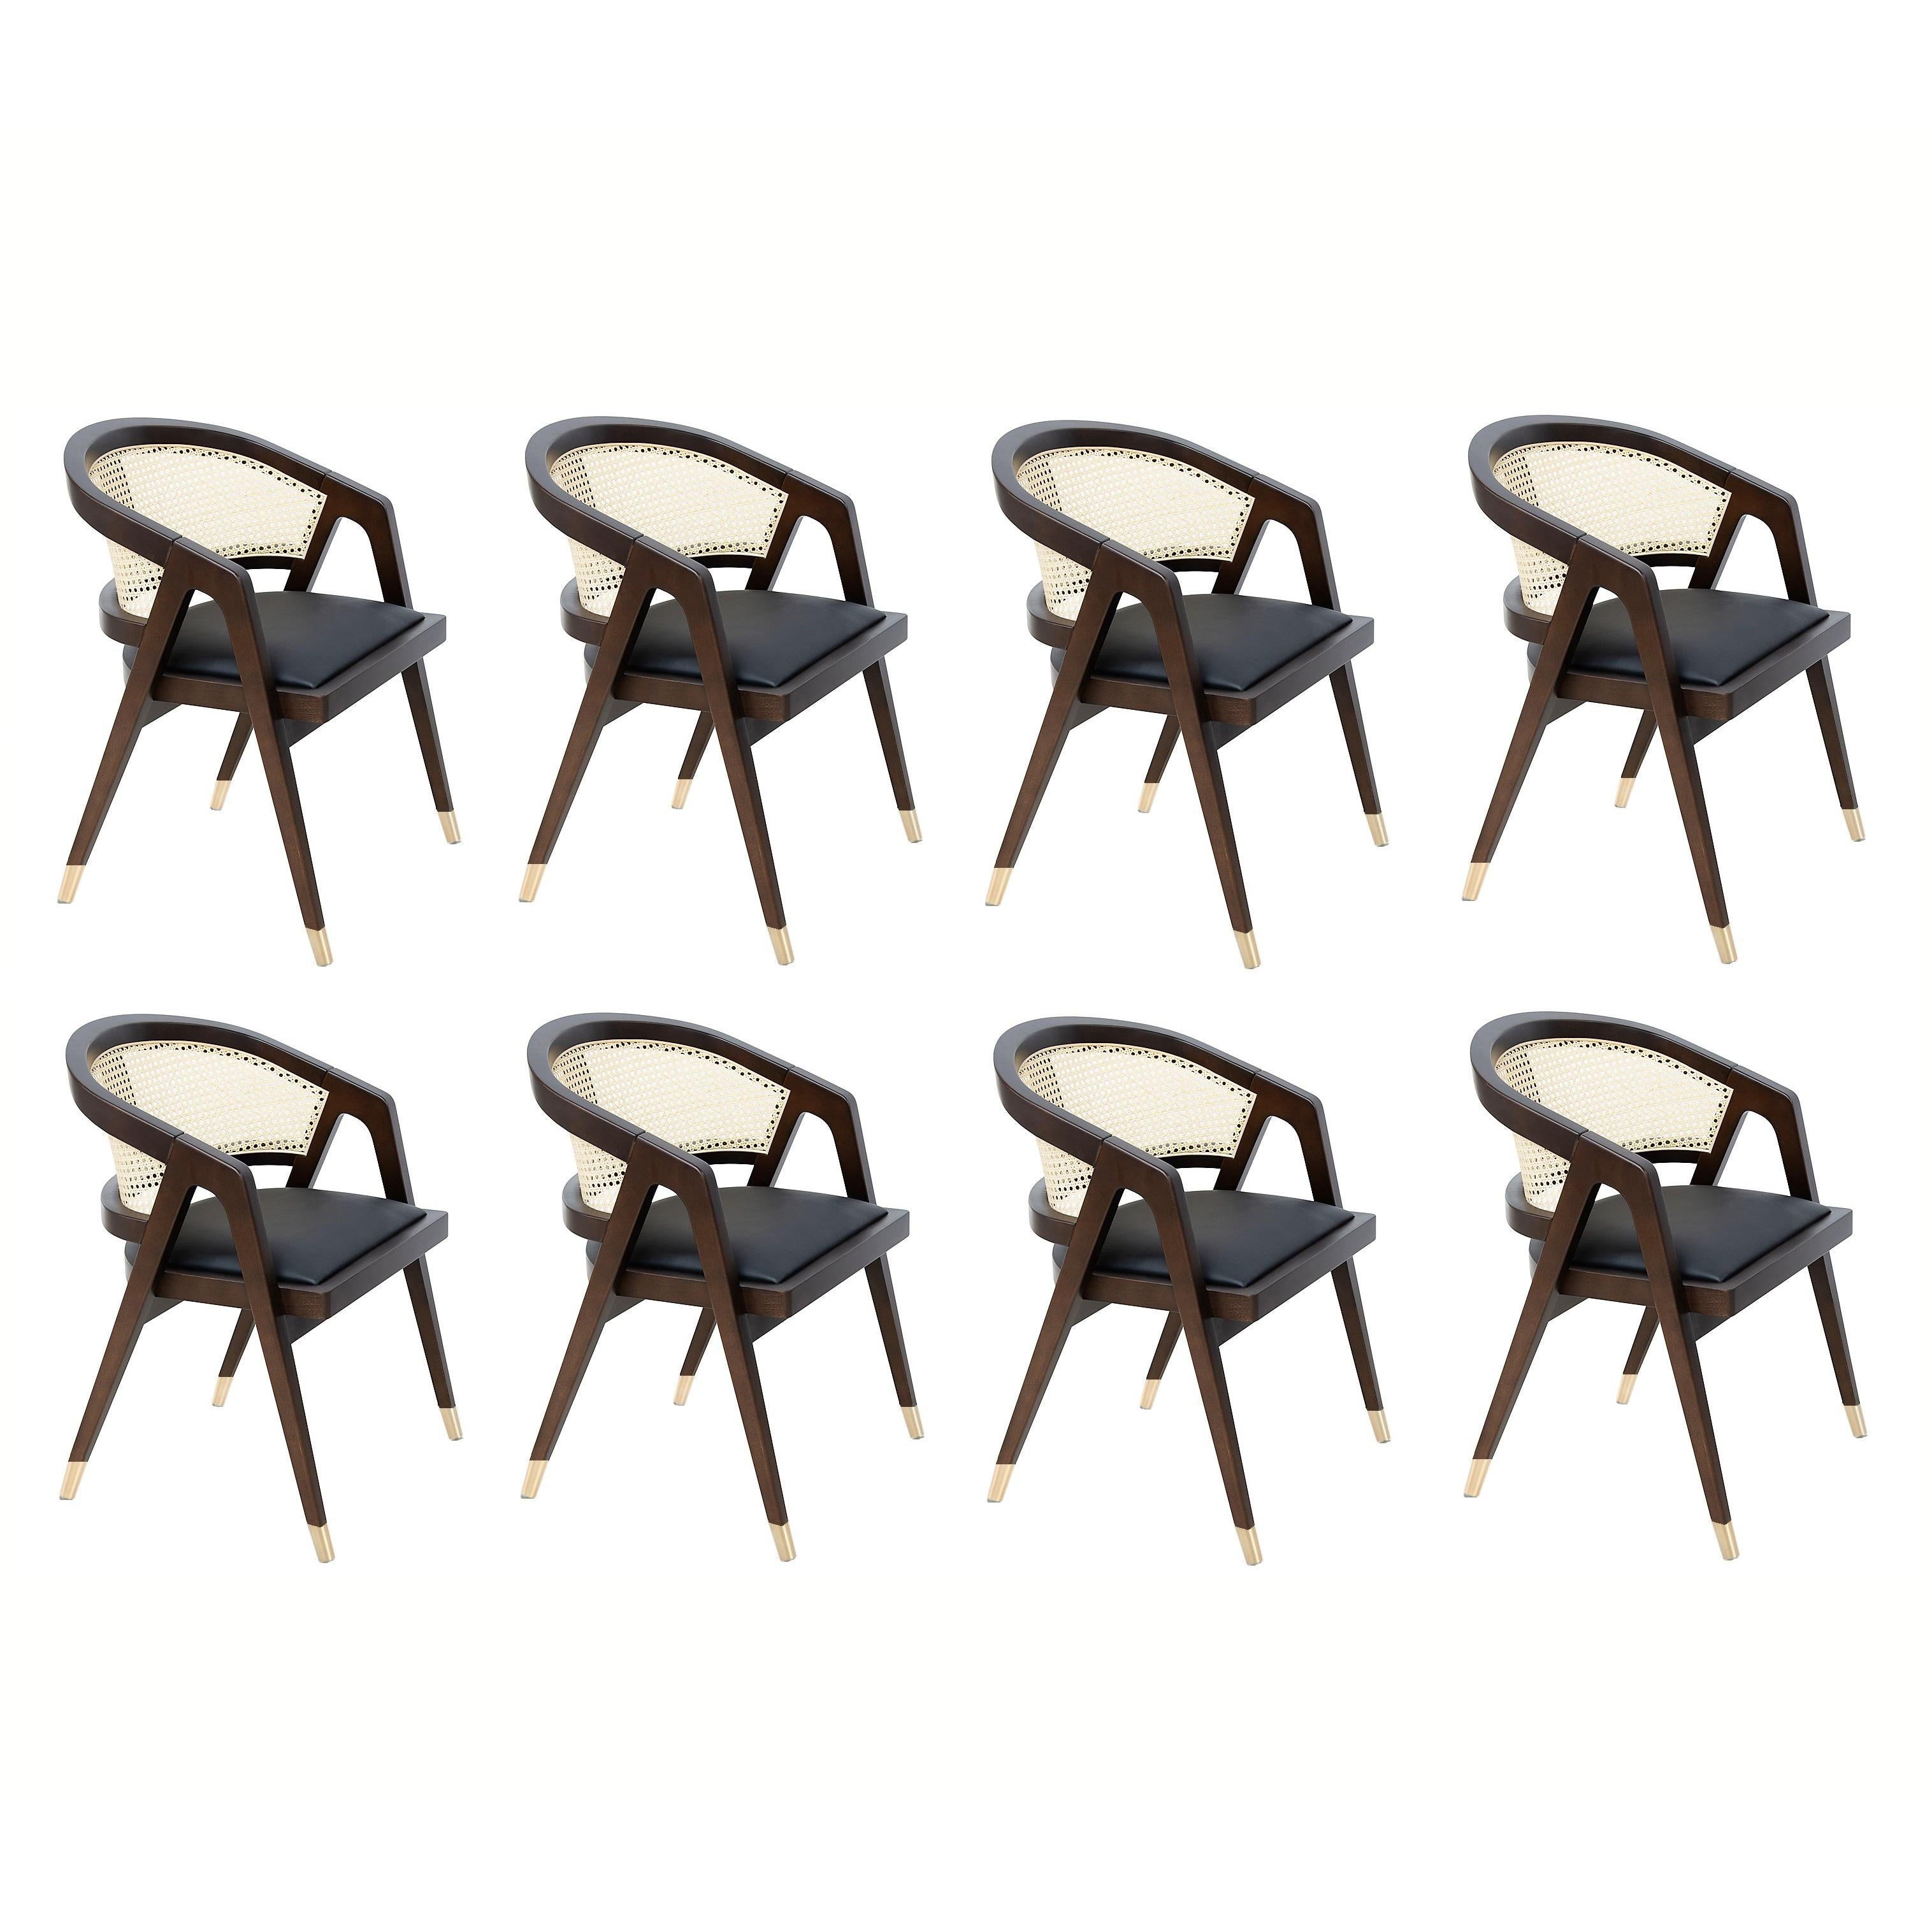 Custom Dining Chairs in Natural Cane, Set of 8